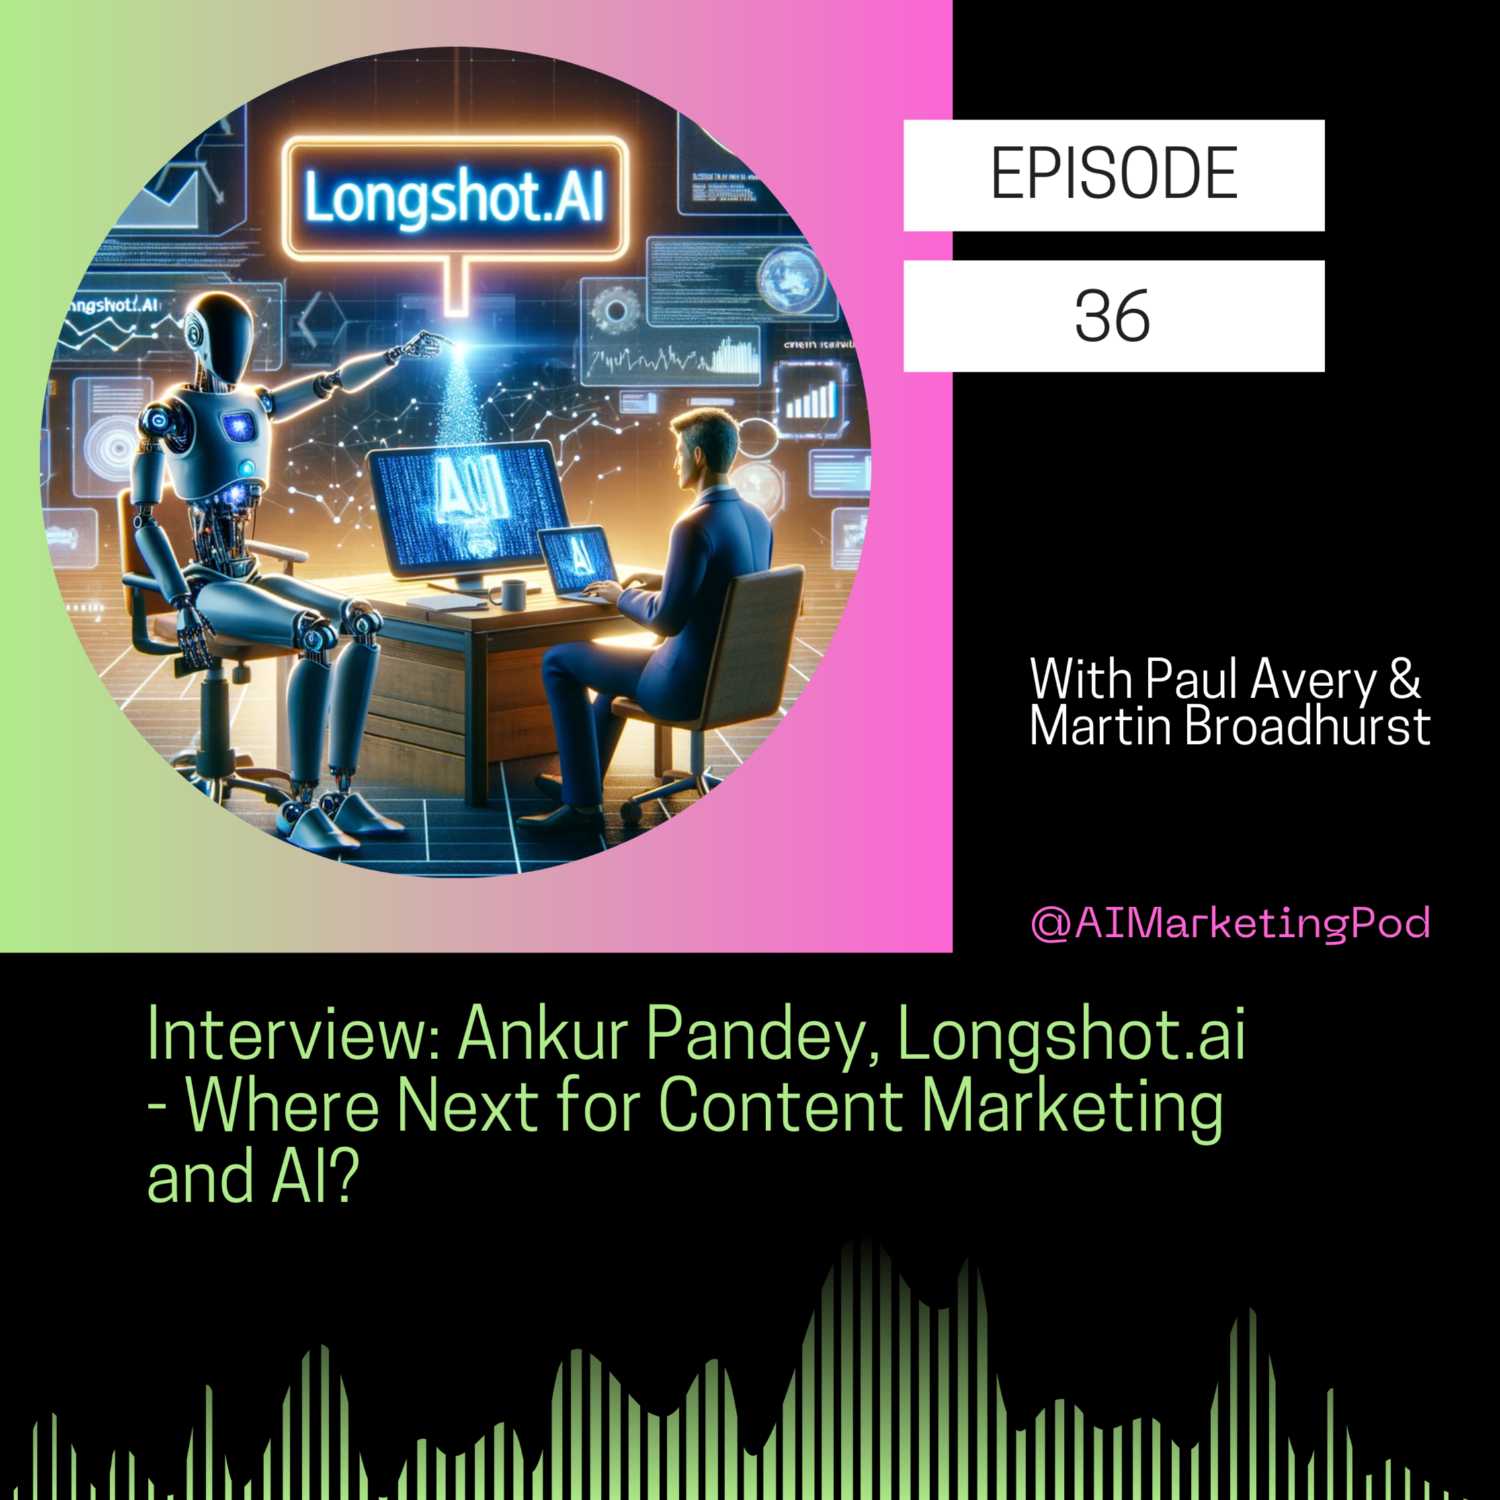 Interview: Ankur Pandey, Longshot.ai - Where Next for Content Marketing and AI?